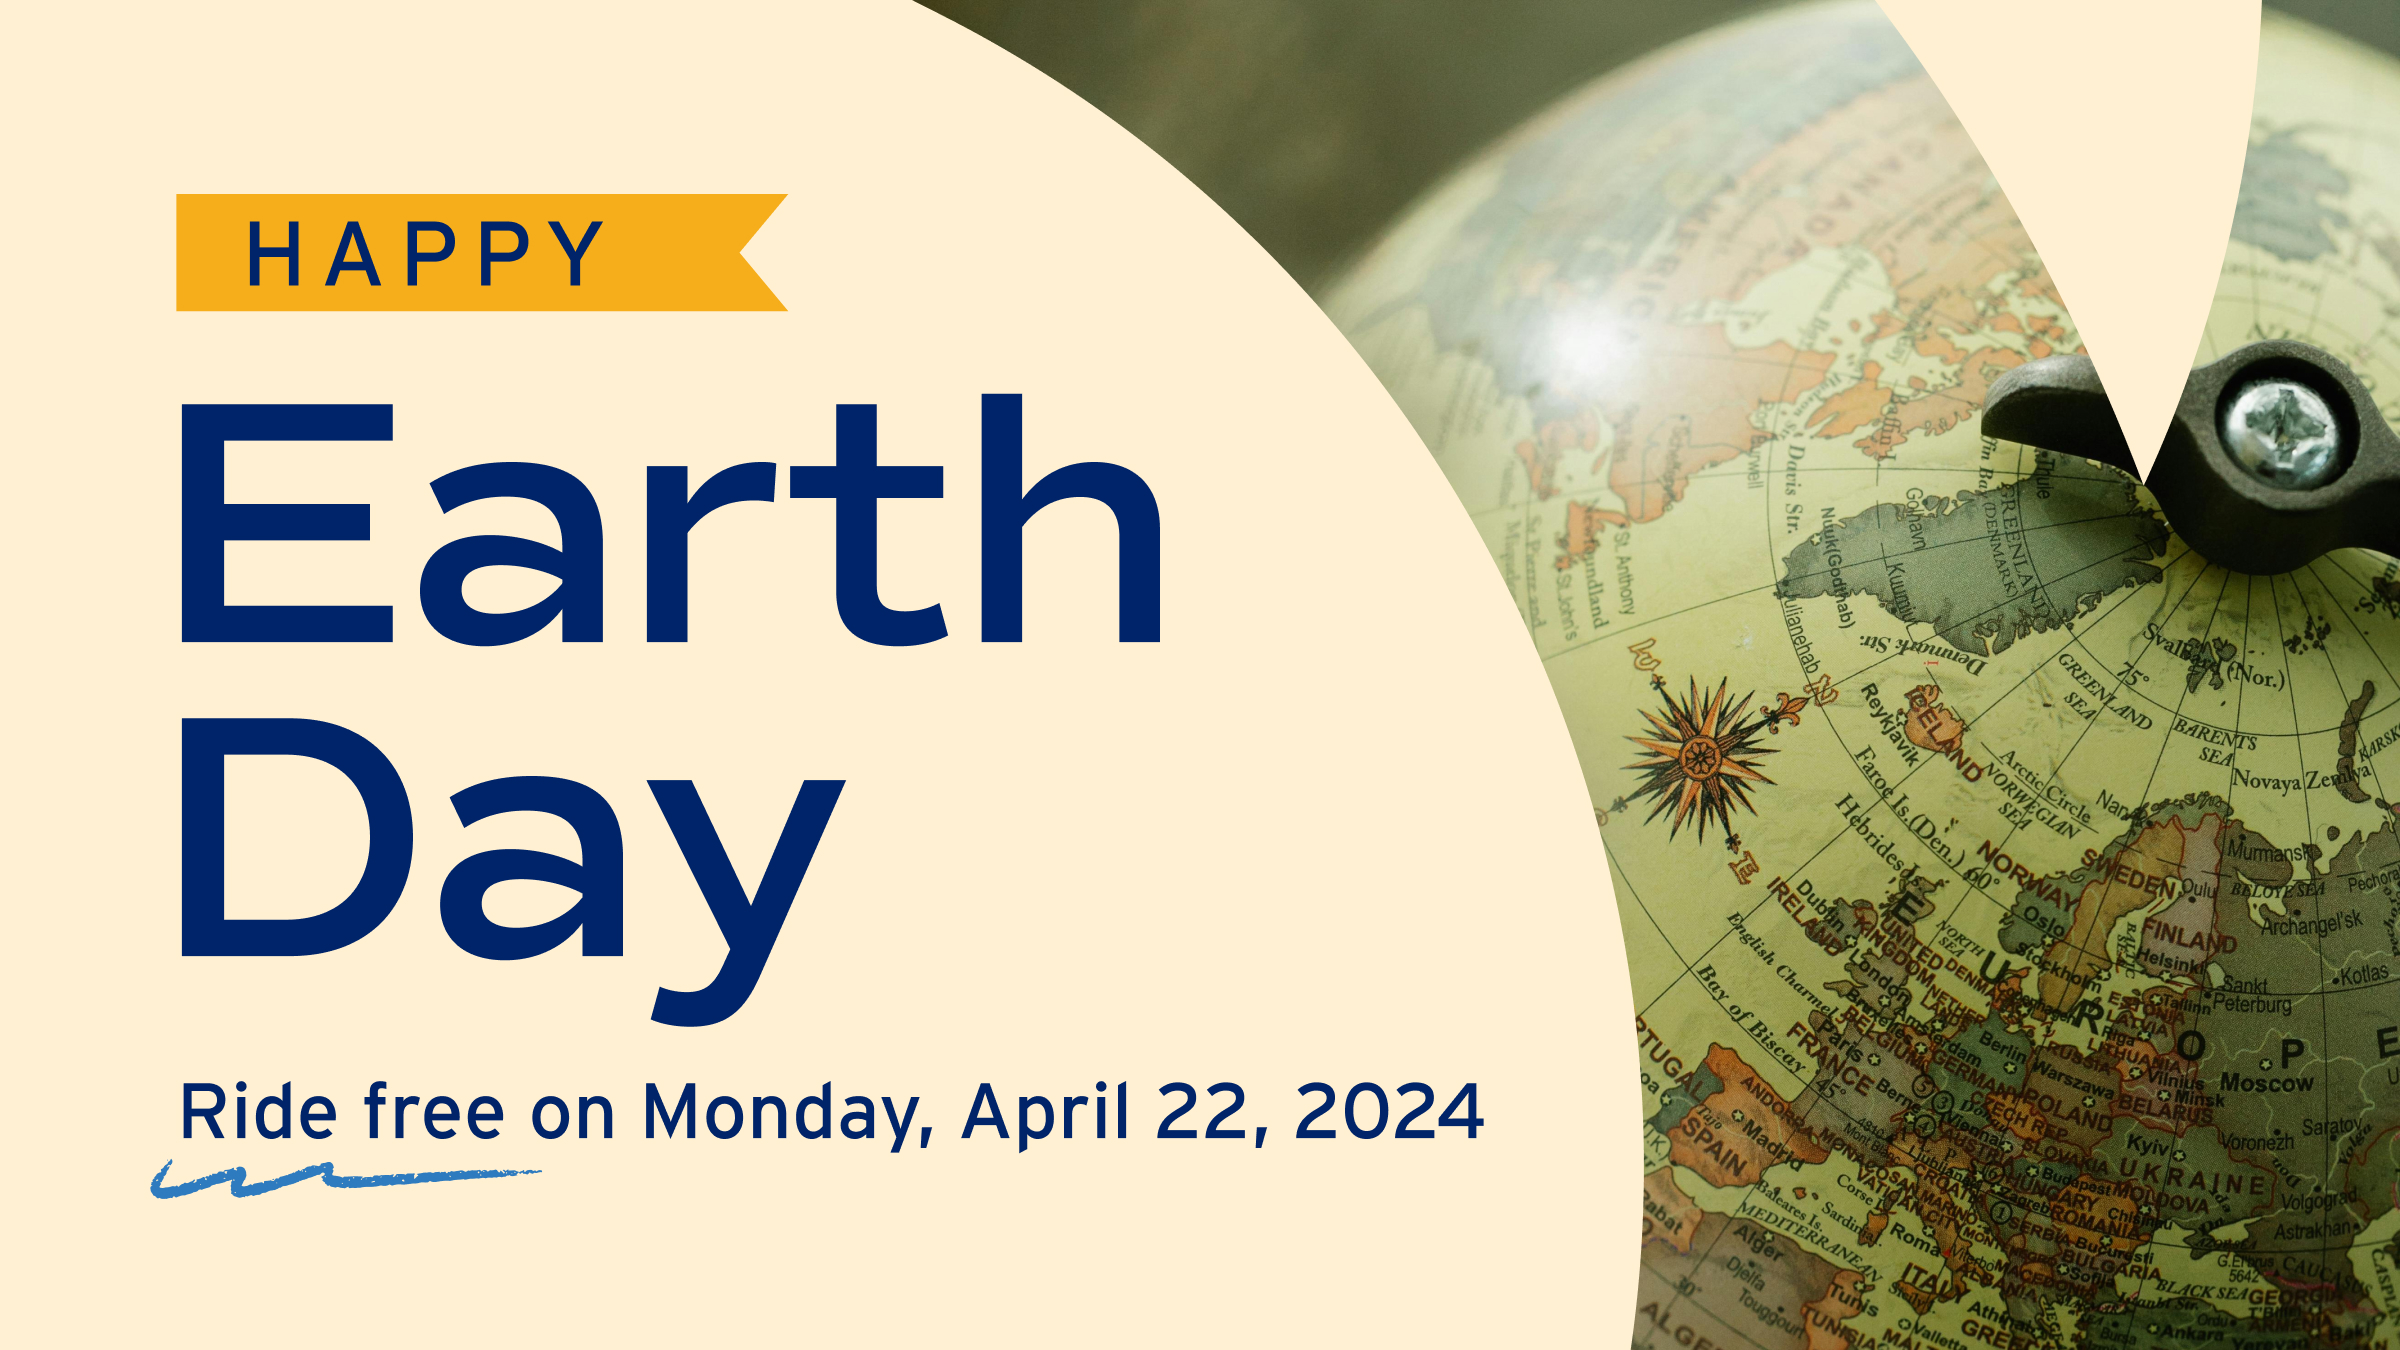 Happy Earth Day - Ride SacRT for free on Saturday, April 22, 2023